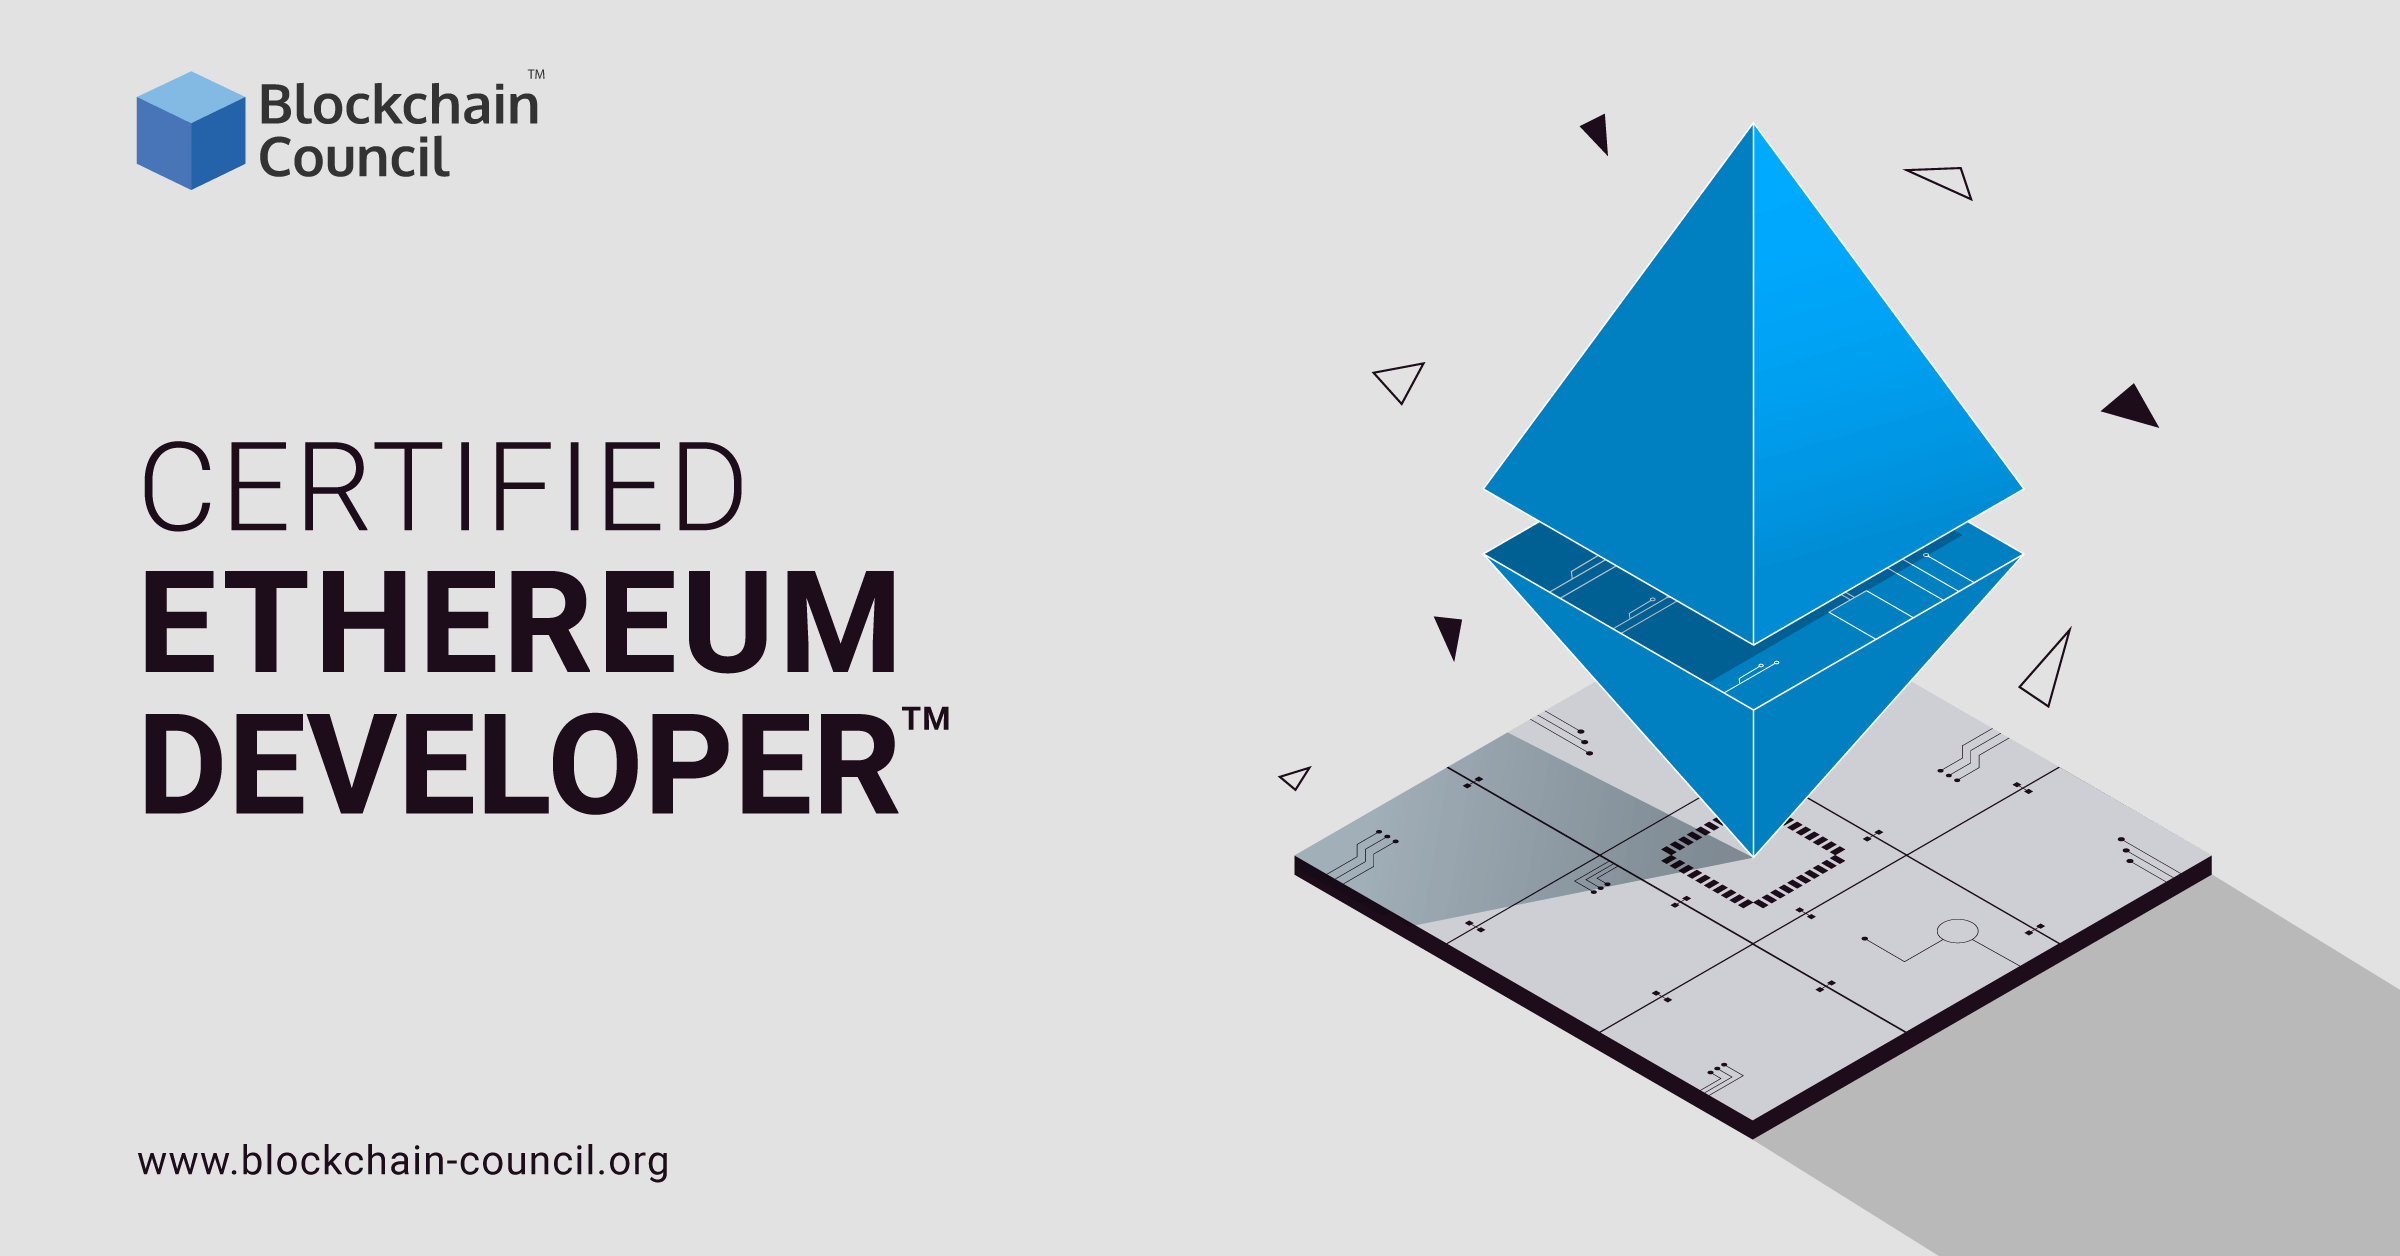 Ethereum expert cryptocurrencies from businesses